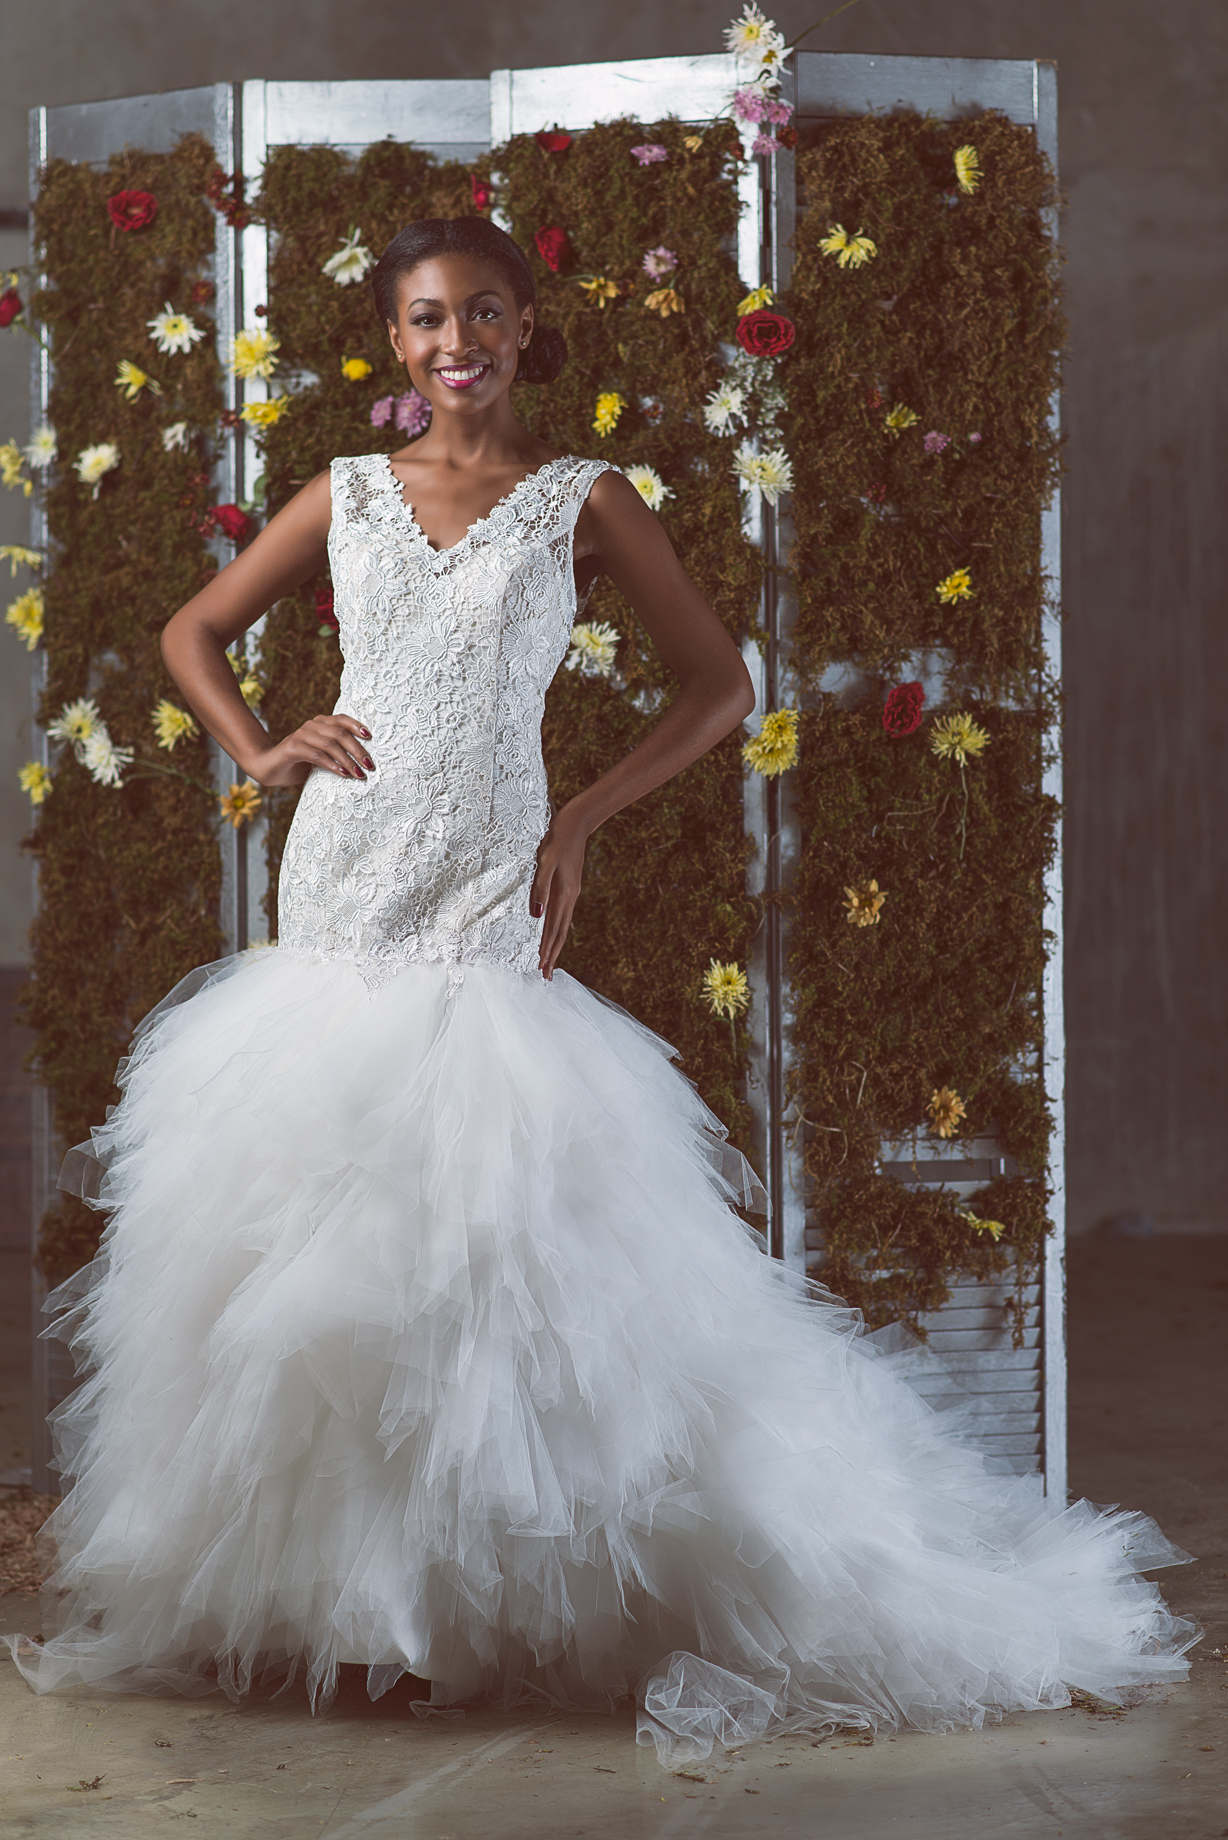 Custom Wedding Dress Collection - MeJeanne Couture